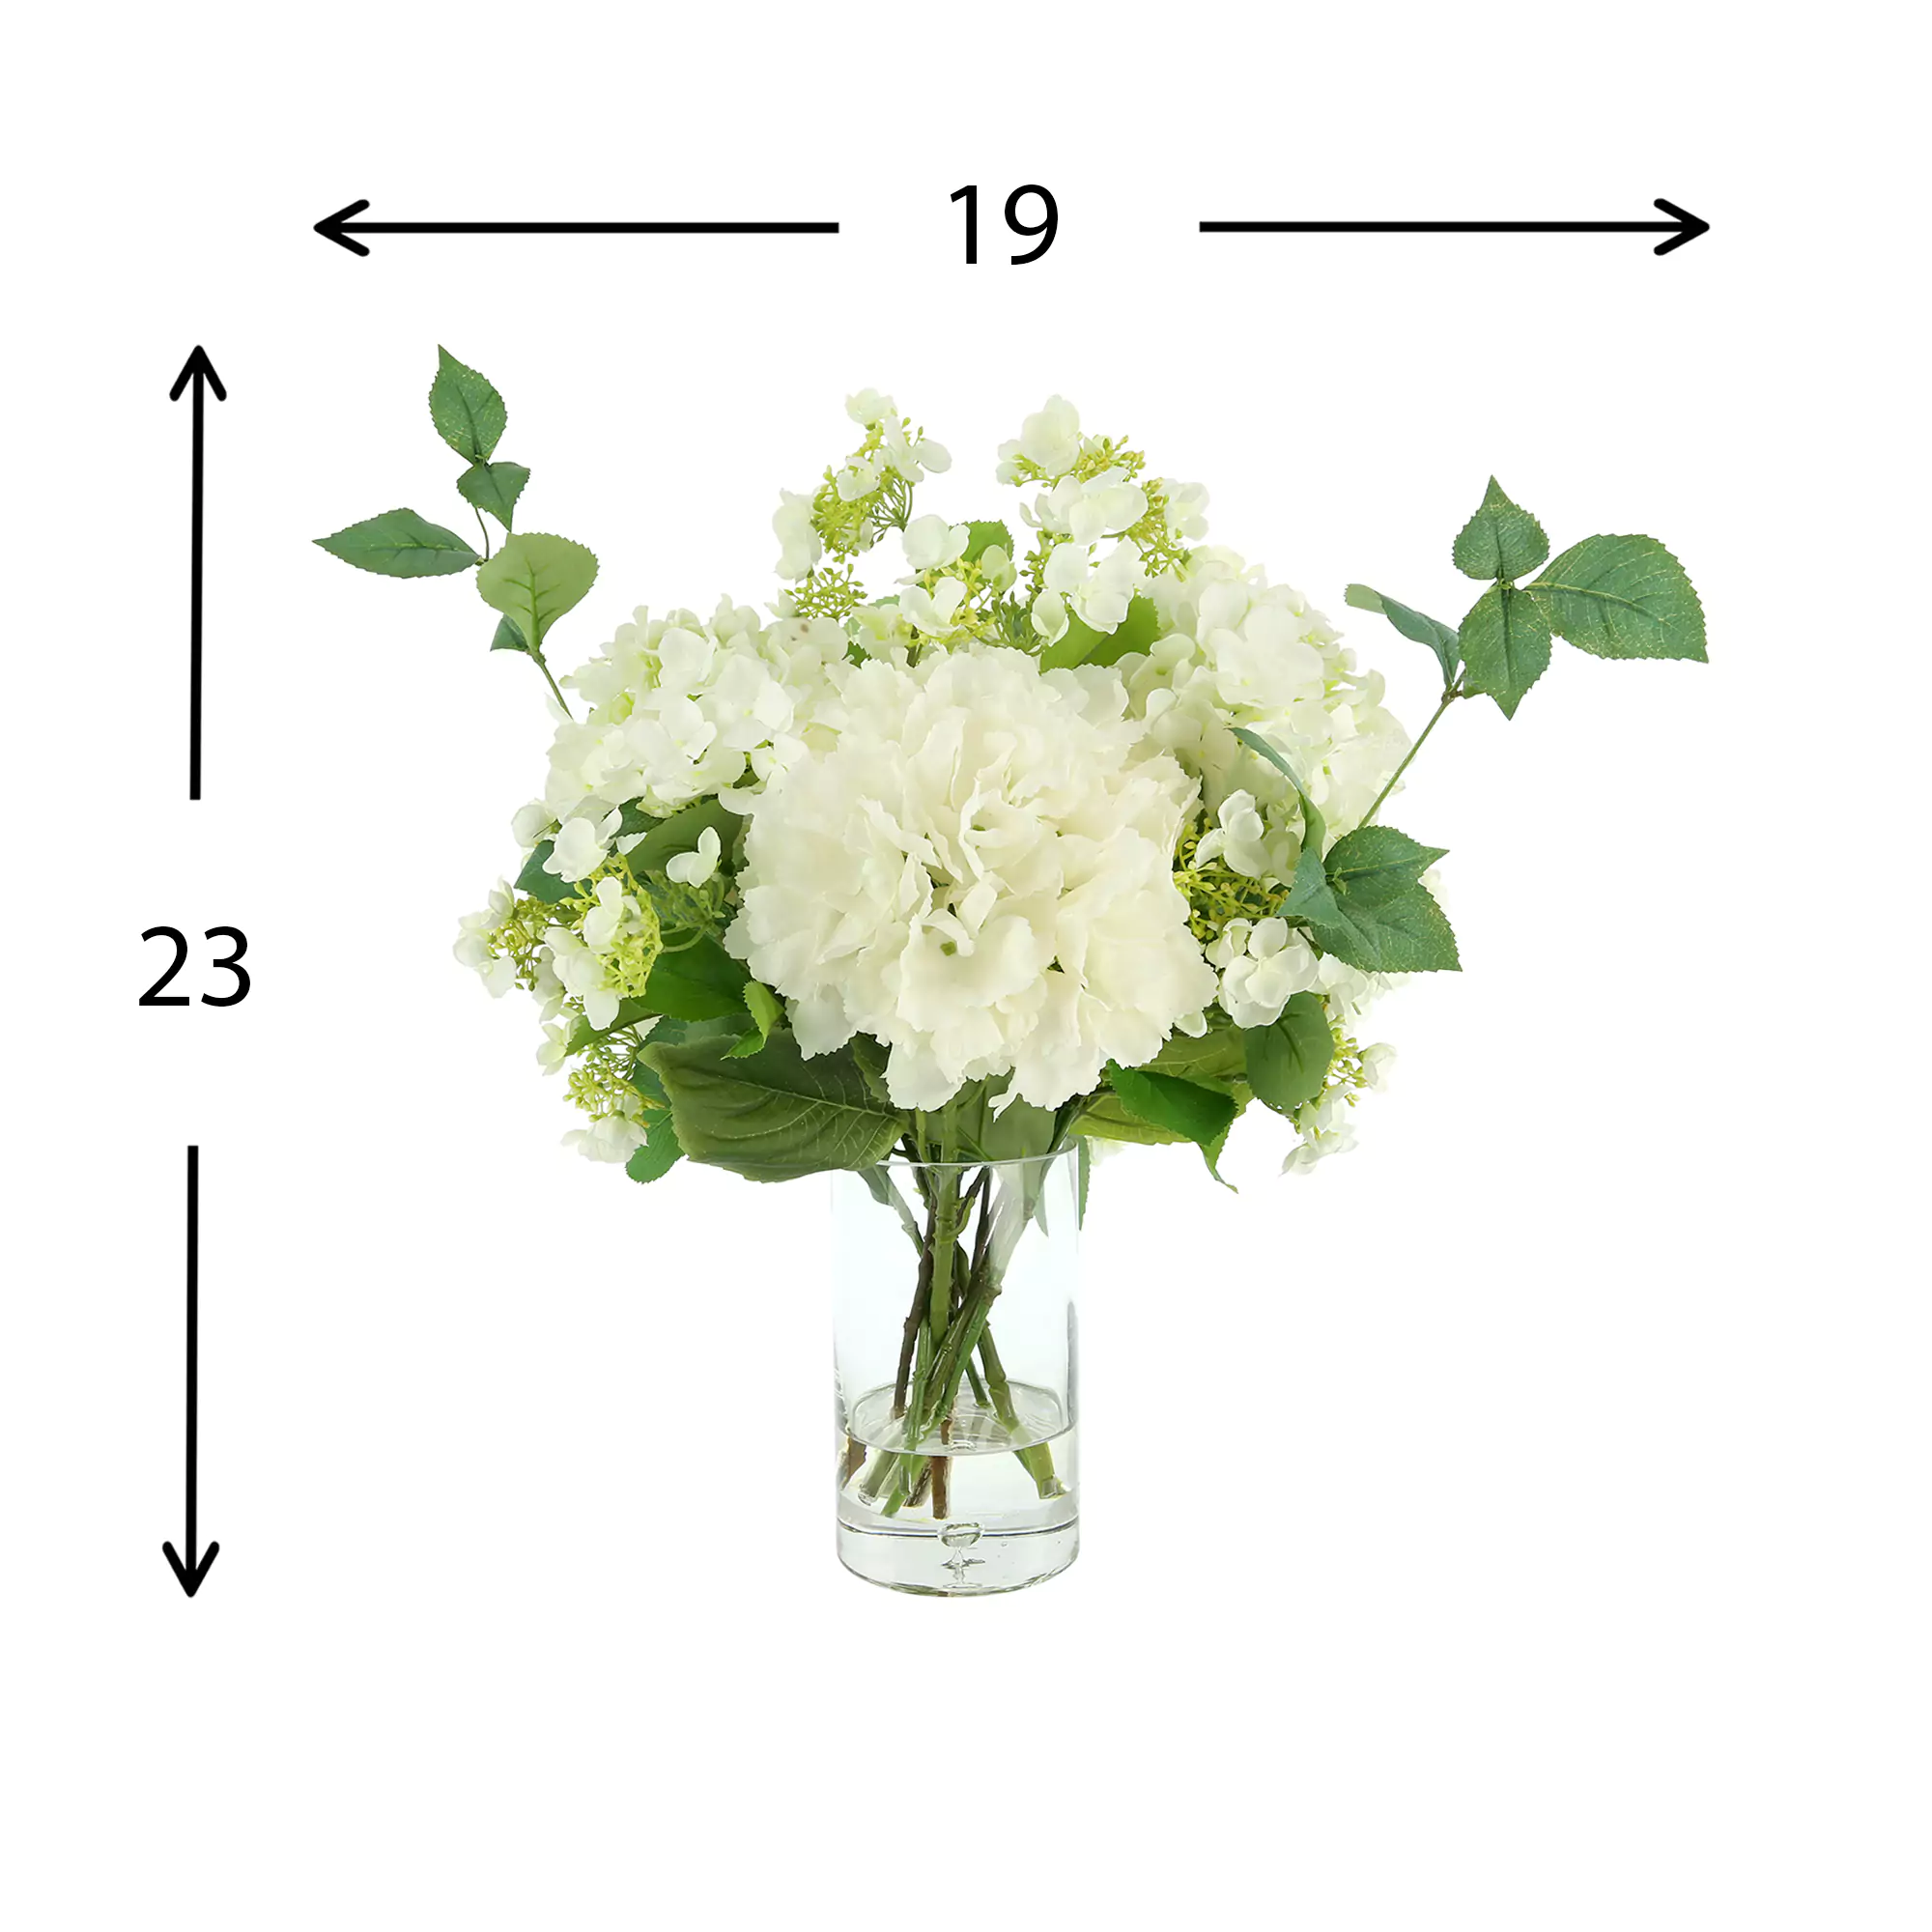 Blooming Hydrangeas in a Glass Vase